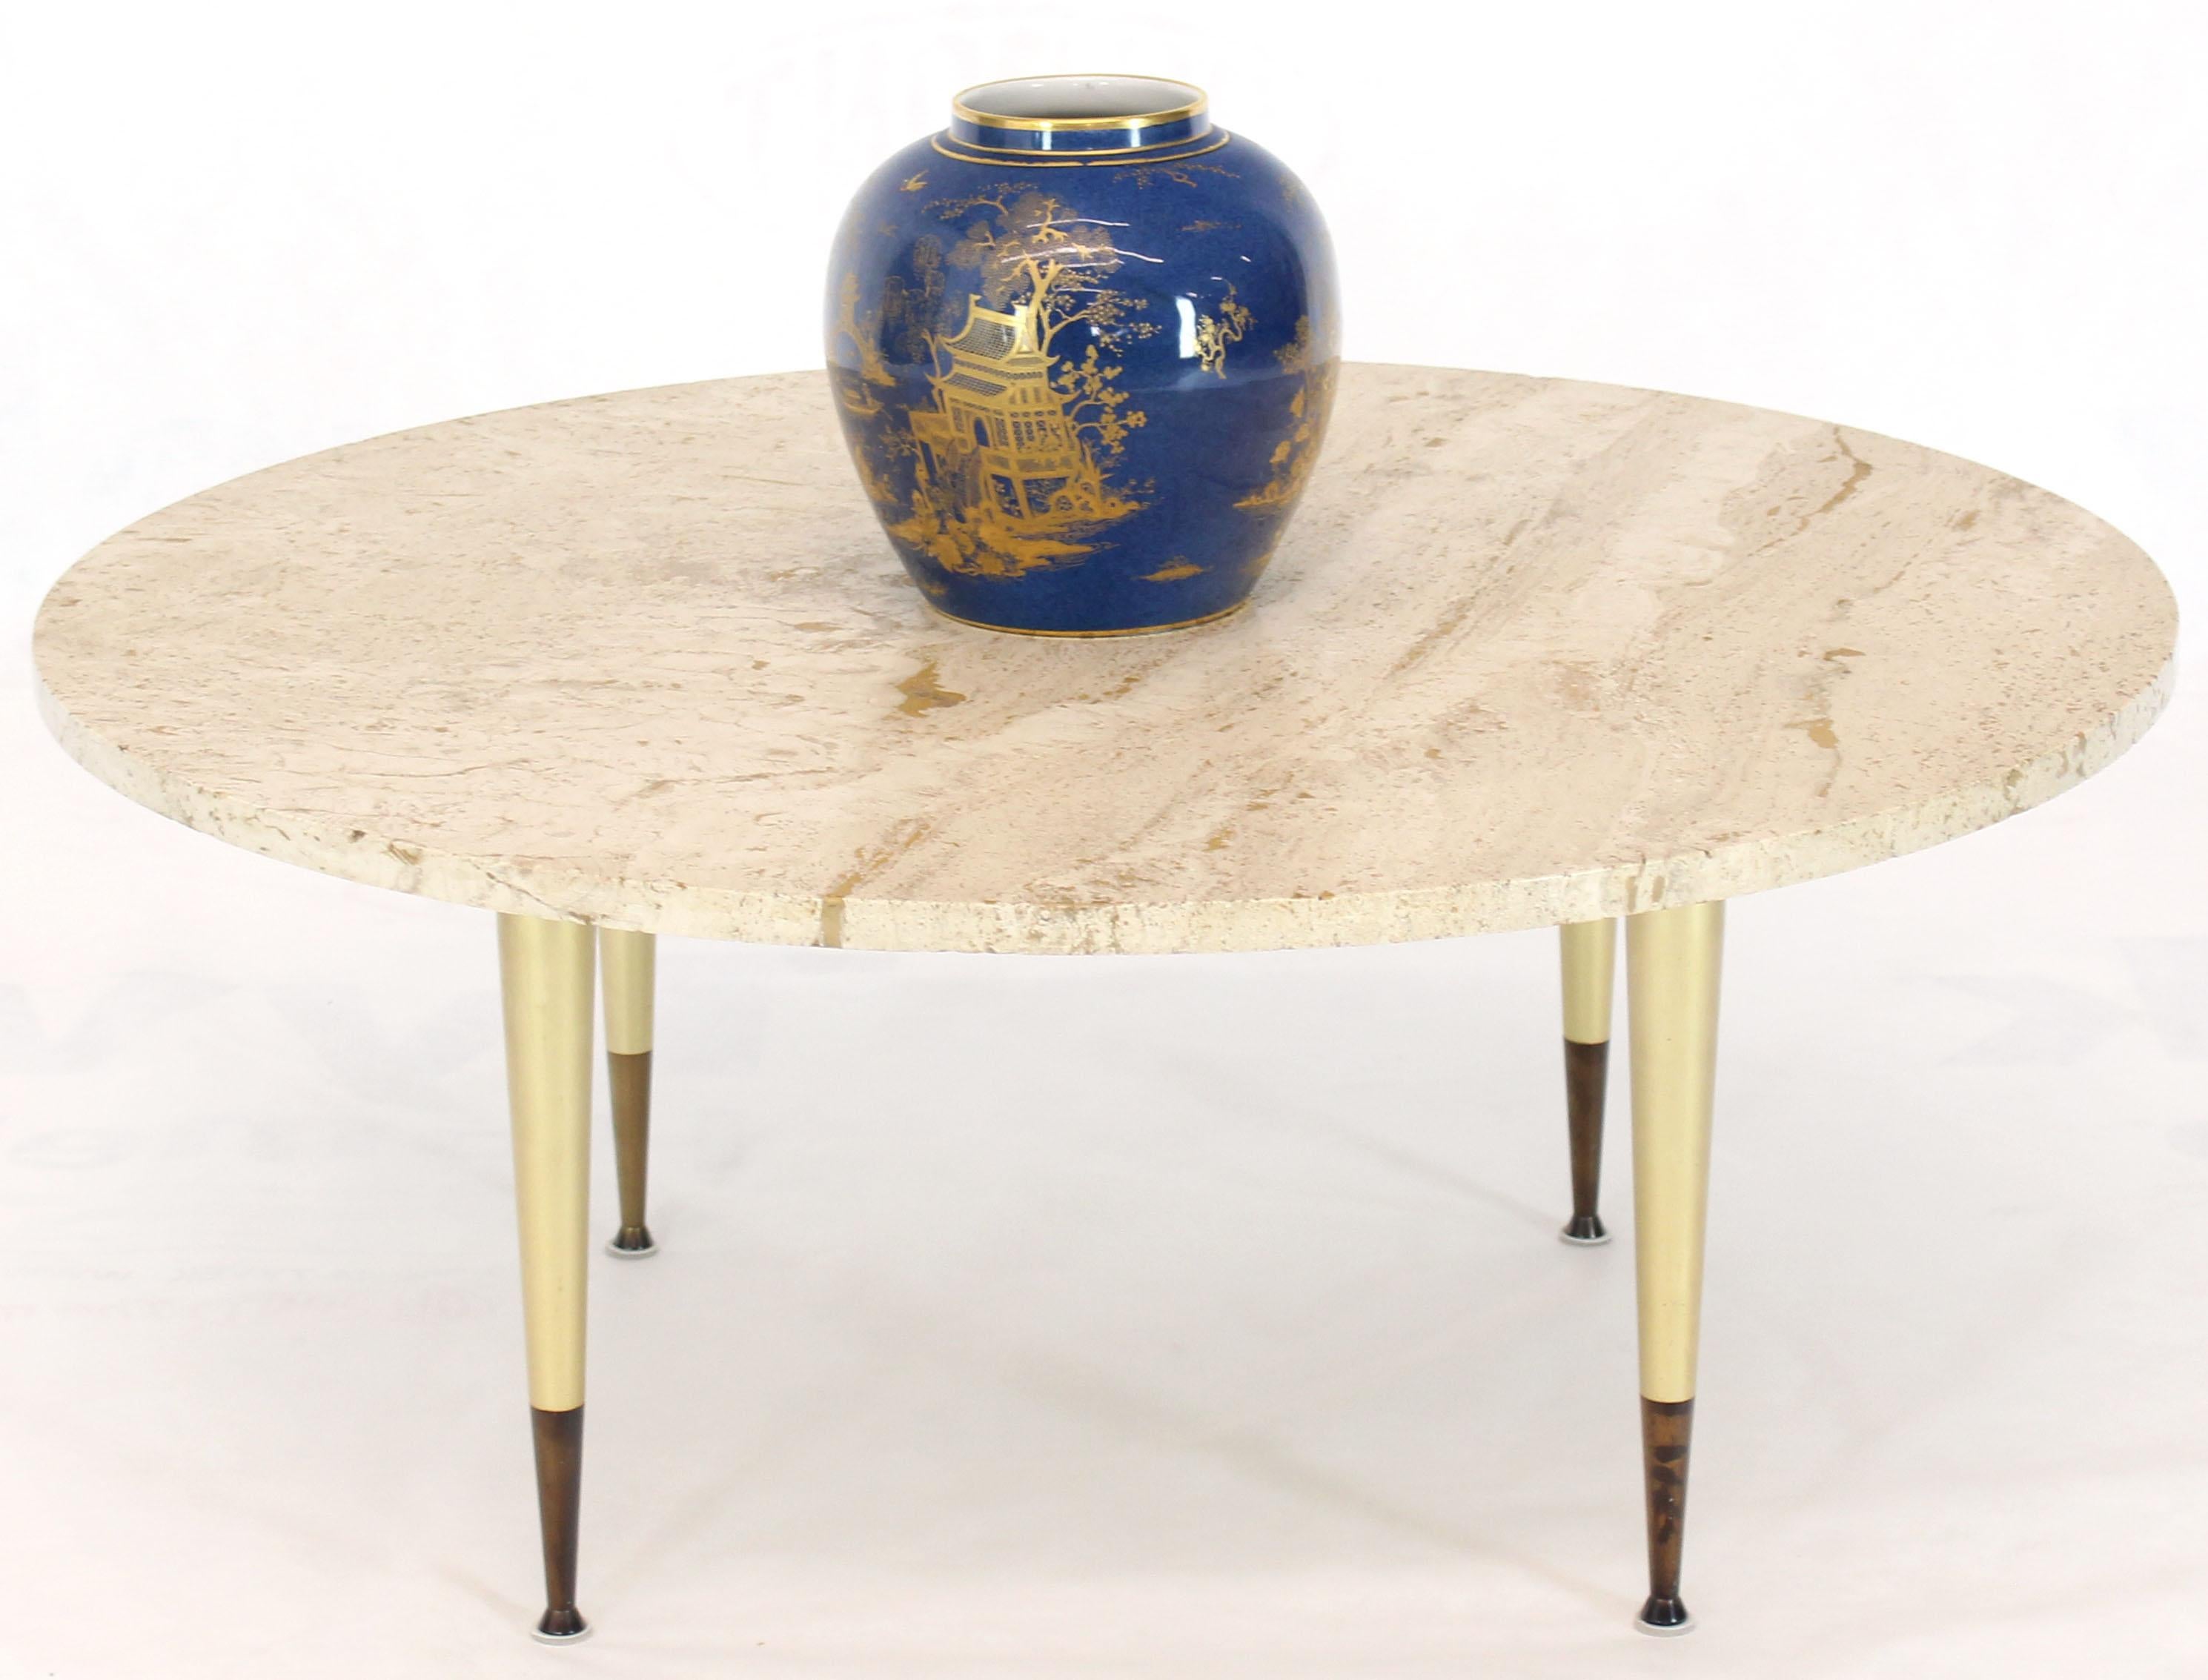 20th Century Italian Modern Round Travertine Top Coffee Table on Tapered Metal Legs Base  For Sale